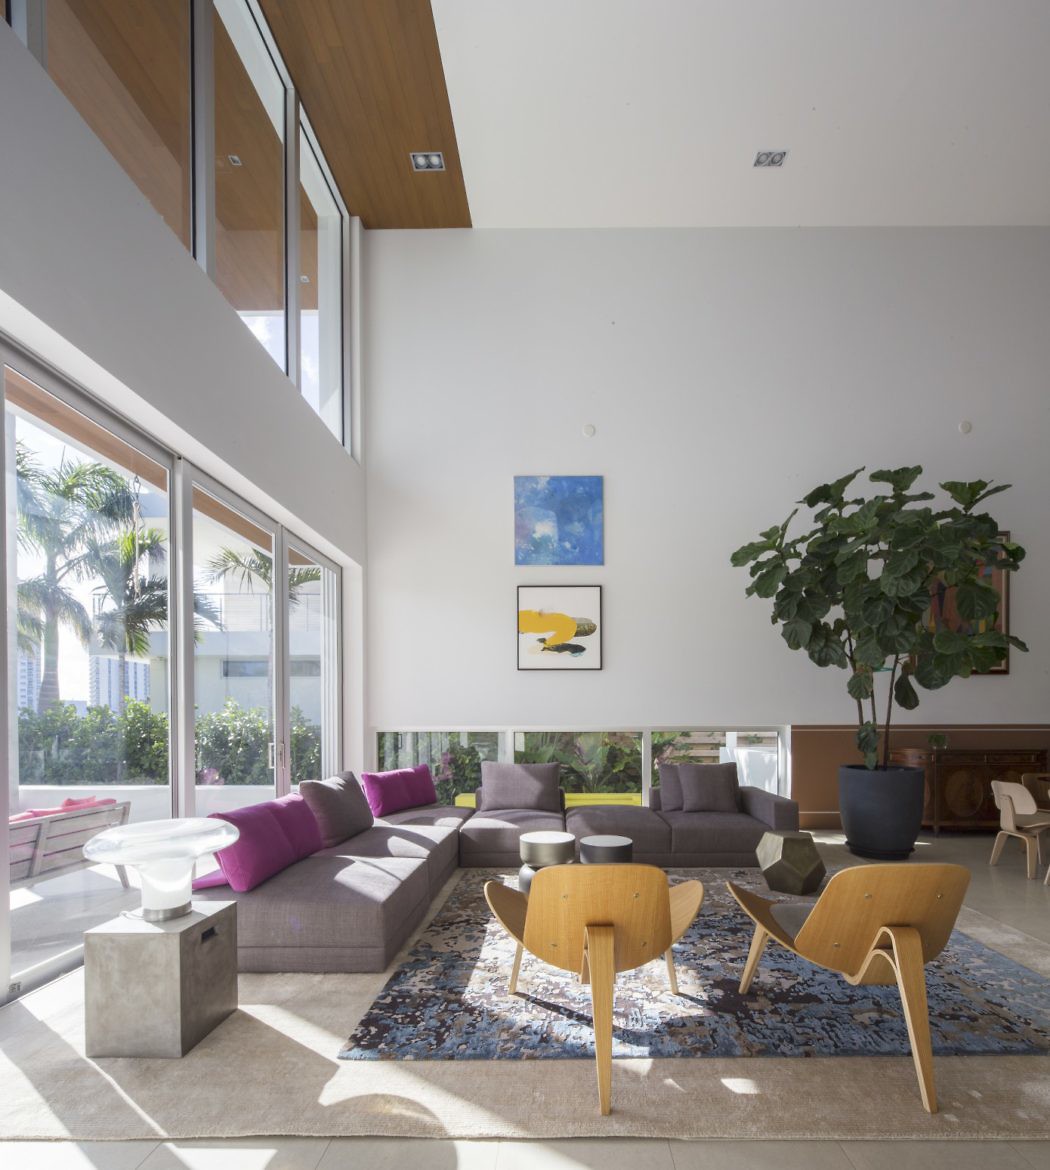 Modern living room with high ceiling, large windows, and colorful furniture.